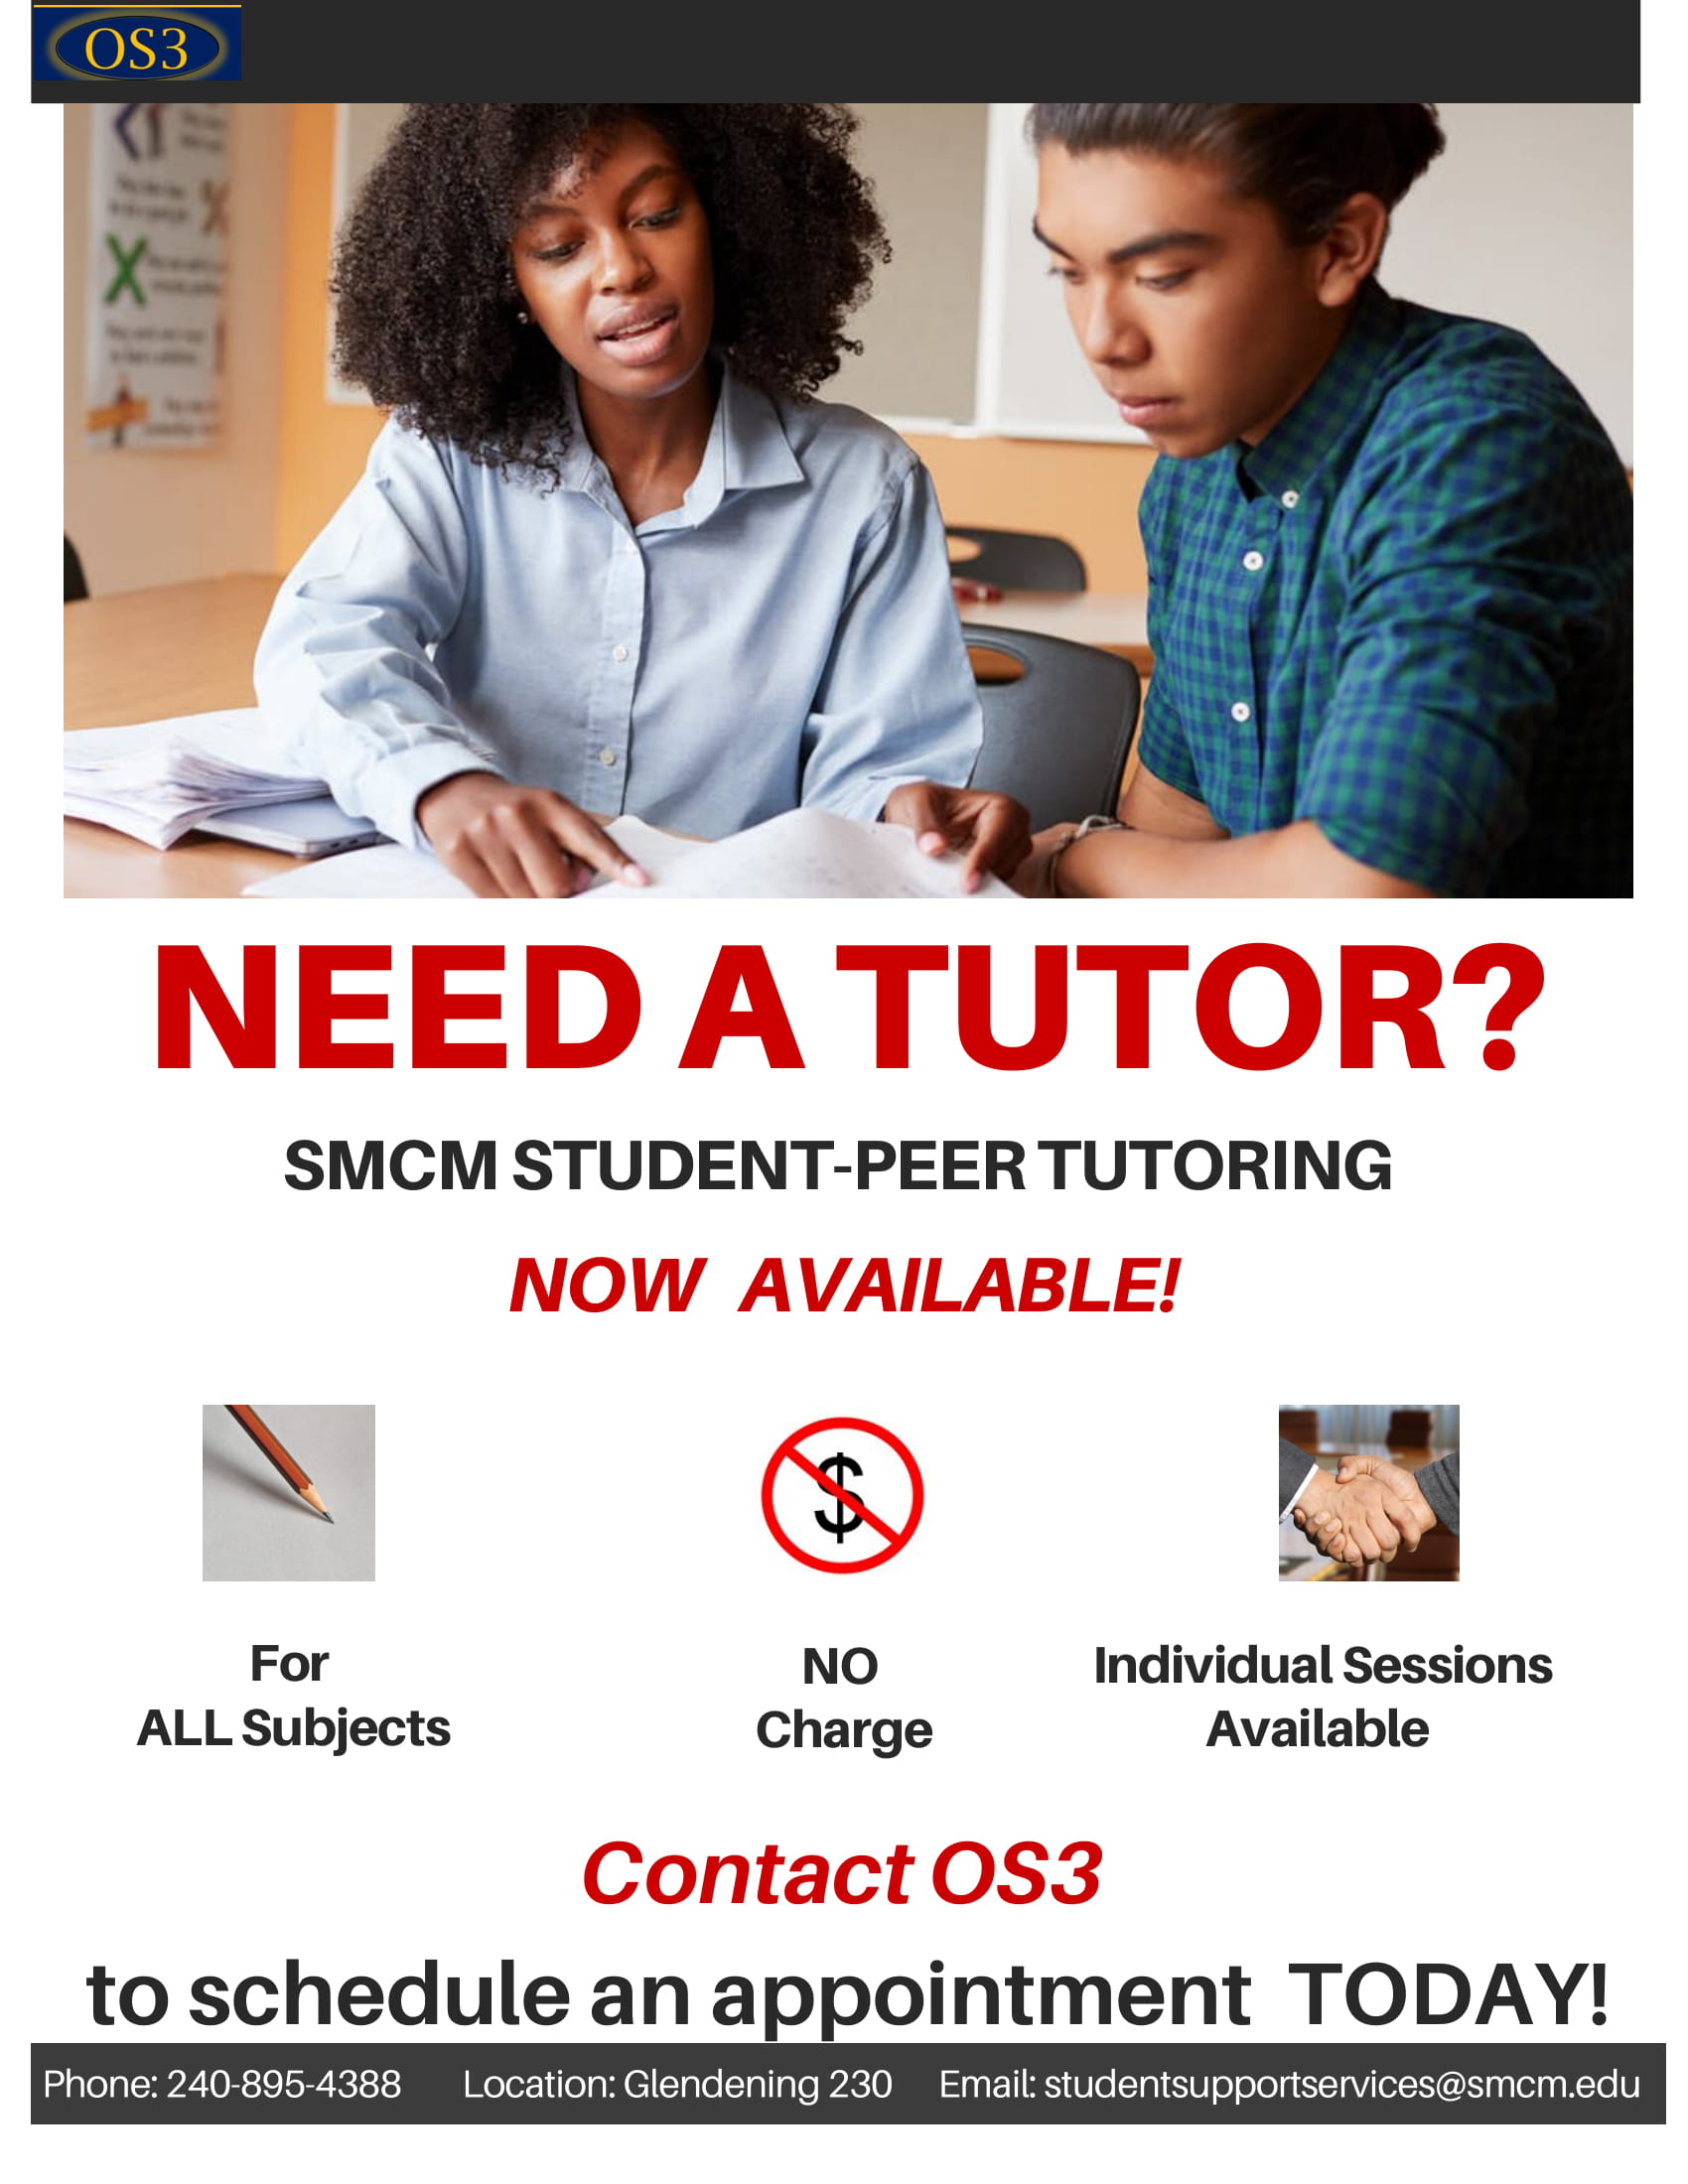 Need help with your subjects? Request a SMCM PEER TUTOR today! It's FREE and available to all students! Contact OS3 for additional information. See flyer for details